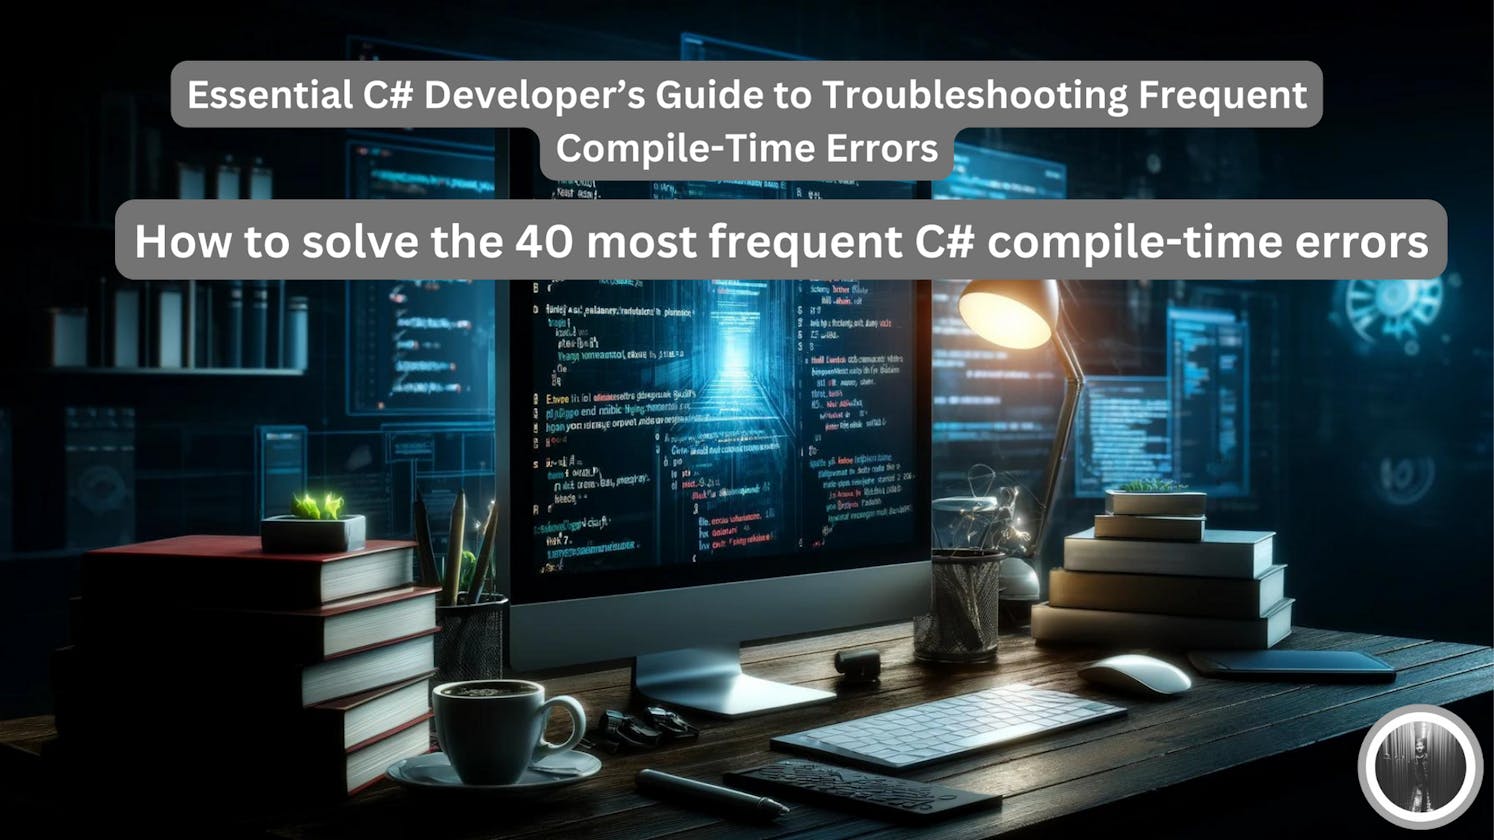 Essential C# Developer’s Guide to Troubleshooting Frequent Compile-Time Errors